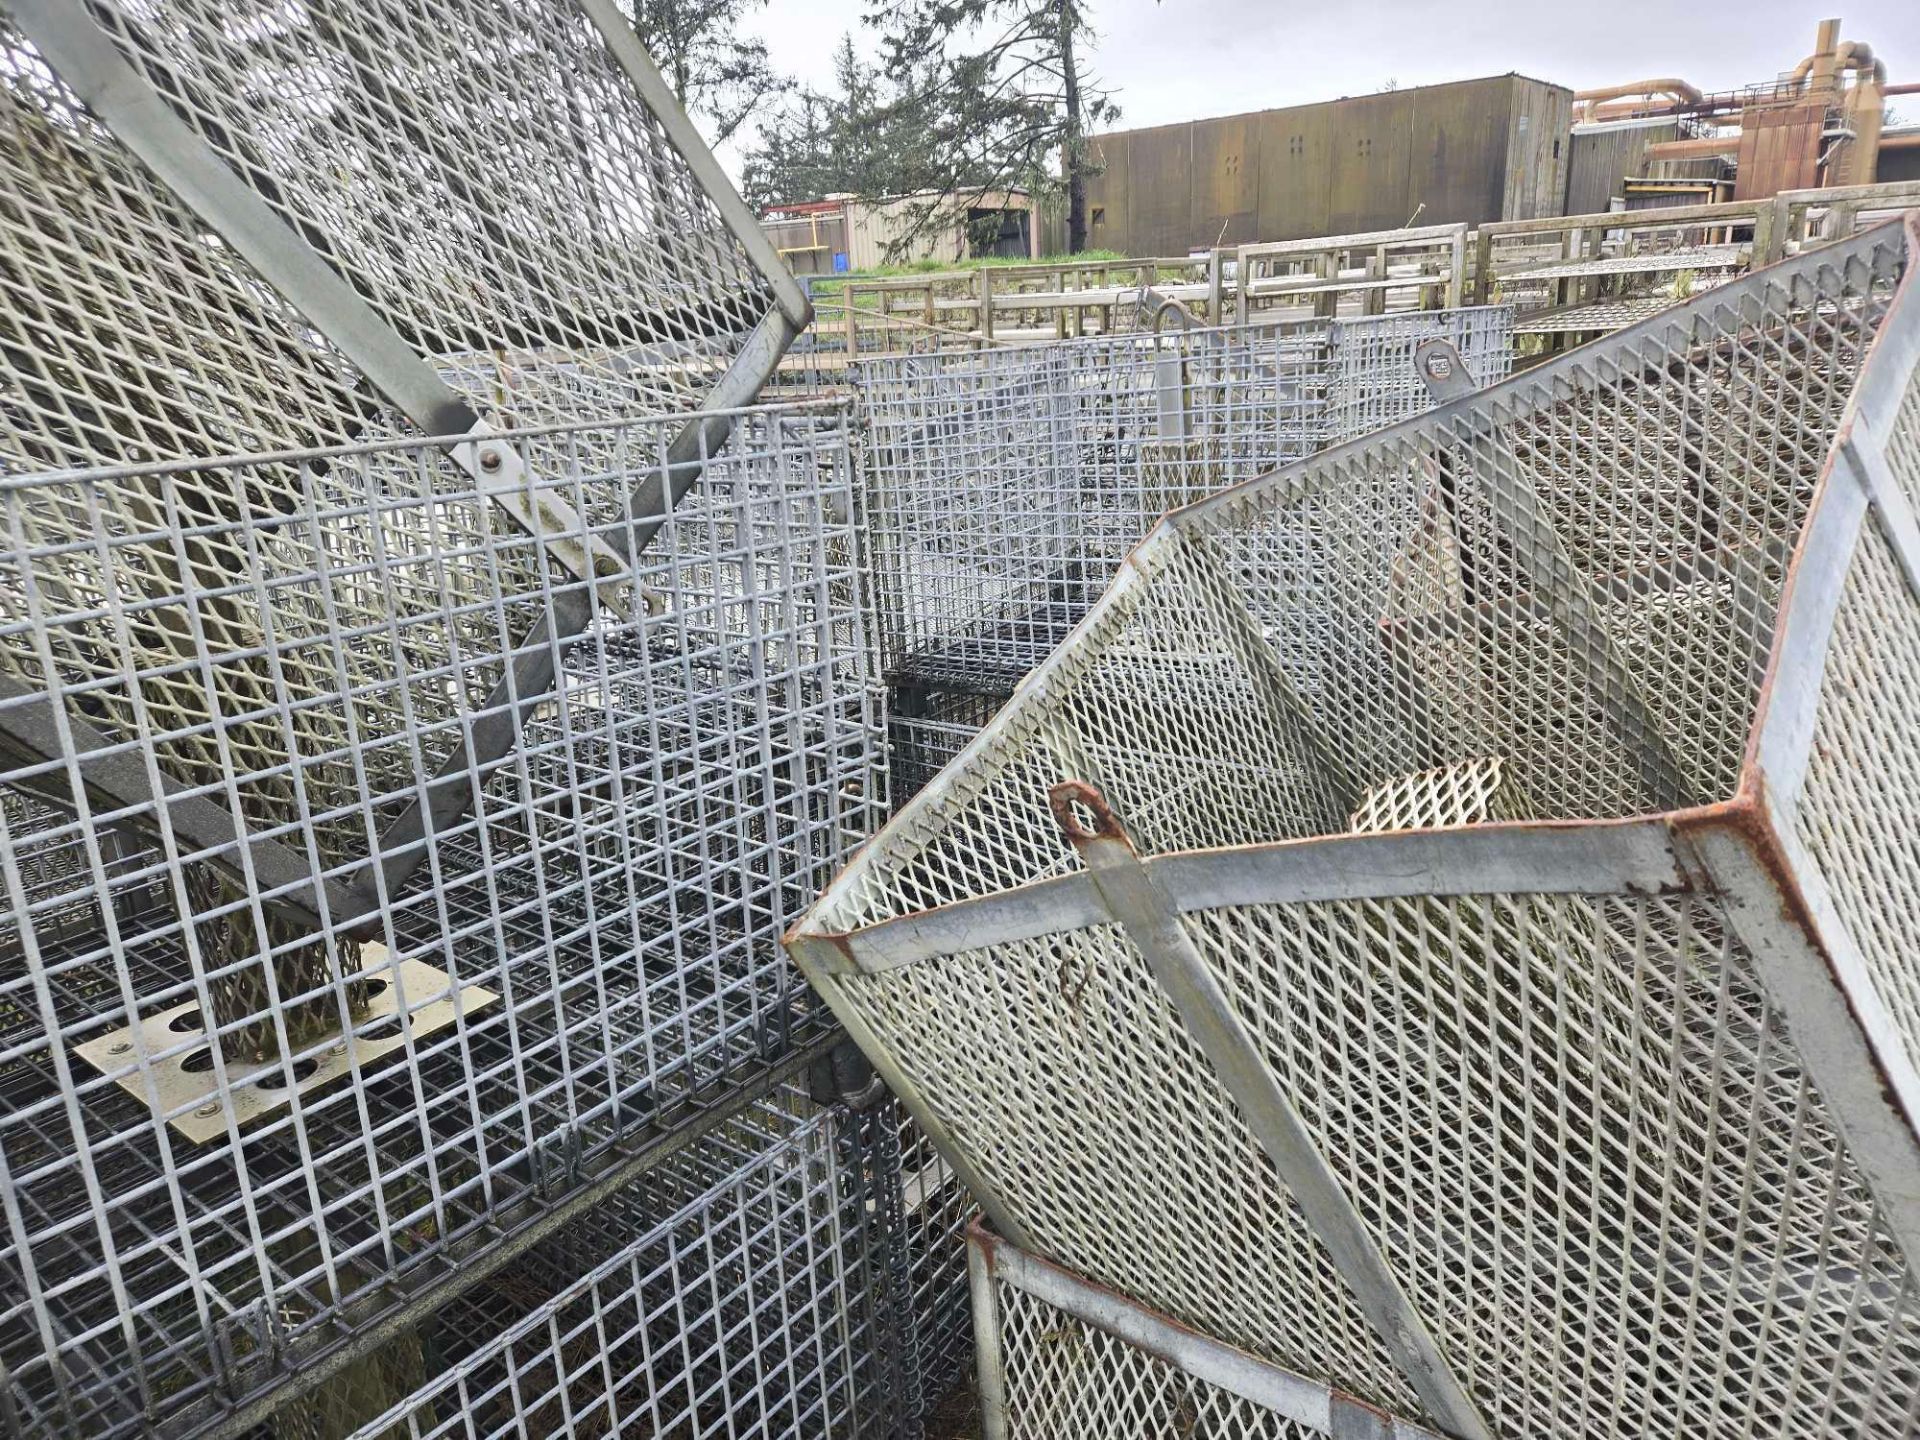 RACKING AND WIRE CRIMPED BASKETS - Image 11 of 12